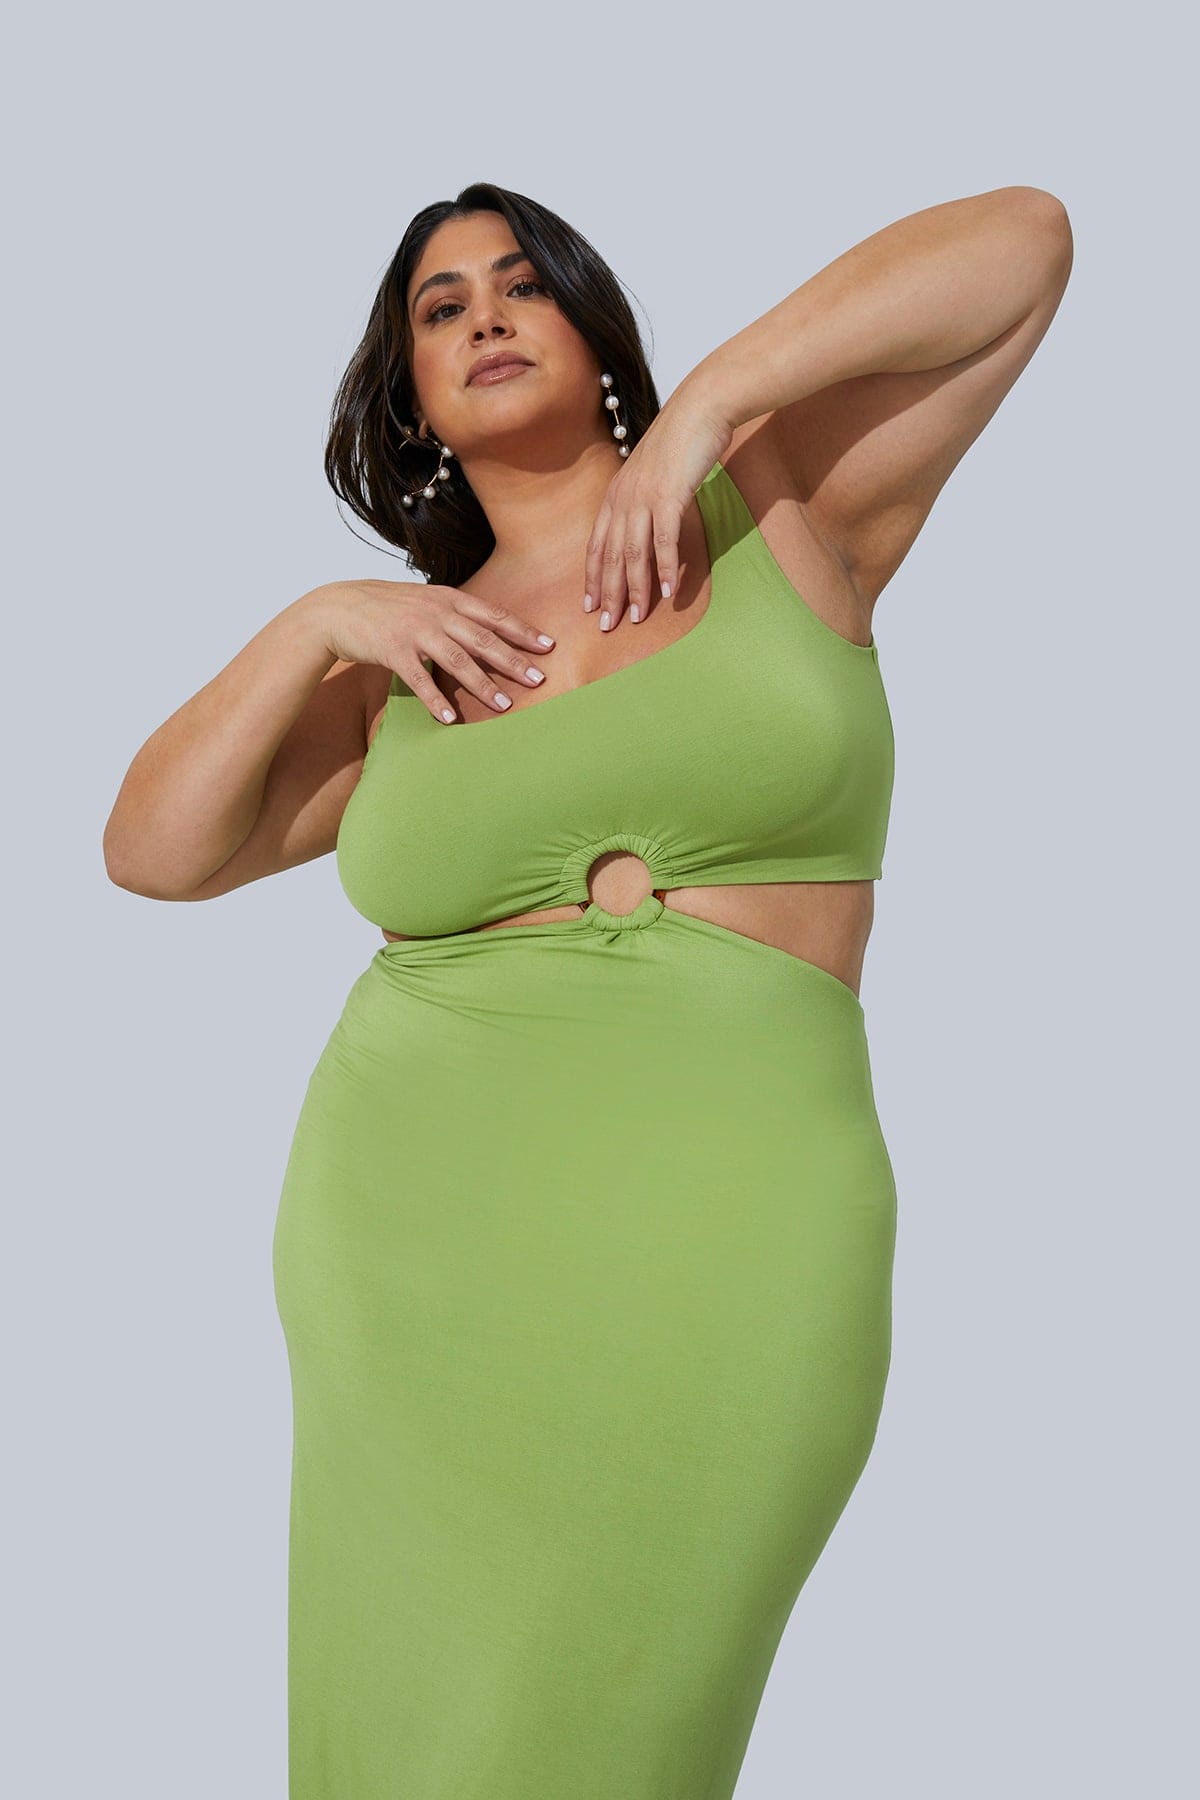 The Gigi Midi Dress from Gia IRL in Pistachio up close and personal. Model is standing with hands near chest and is leaning to the right highlighting the side cutout detail. Model wearing size 1X.